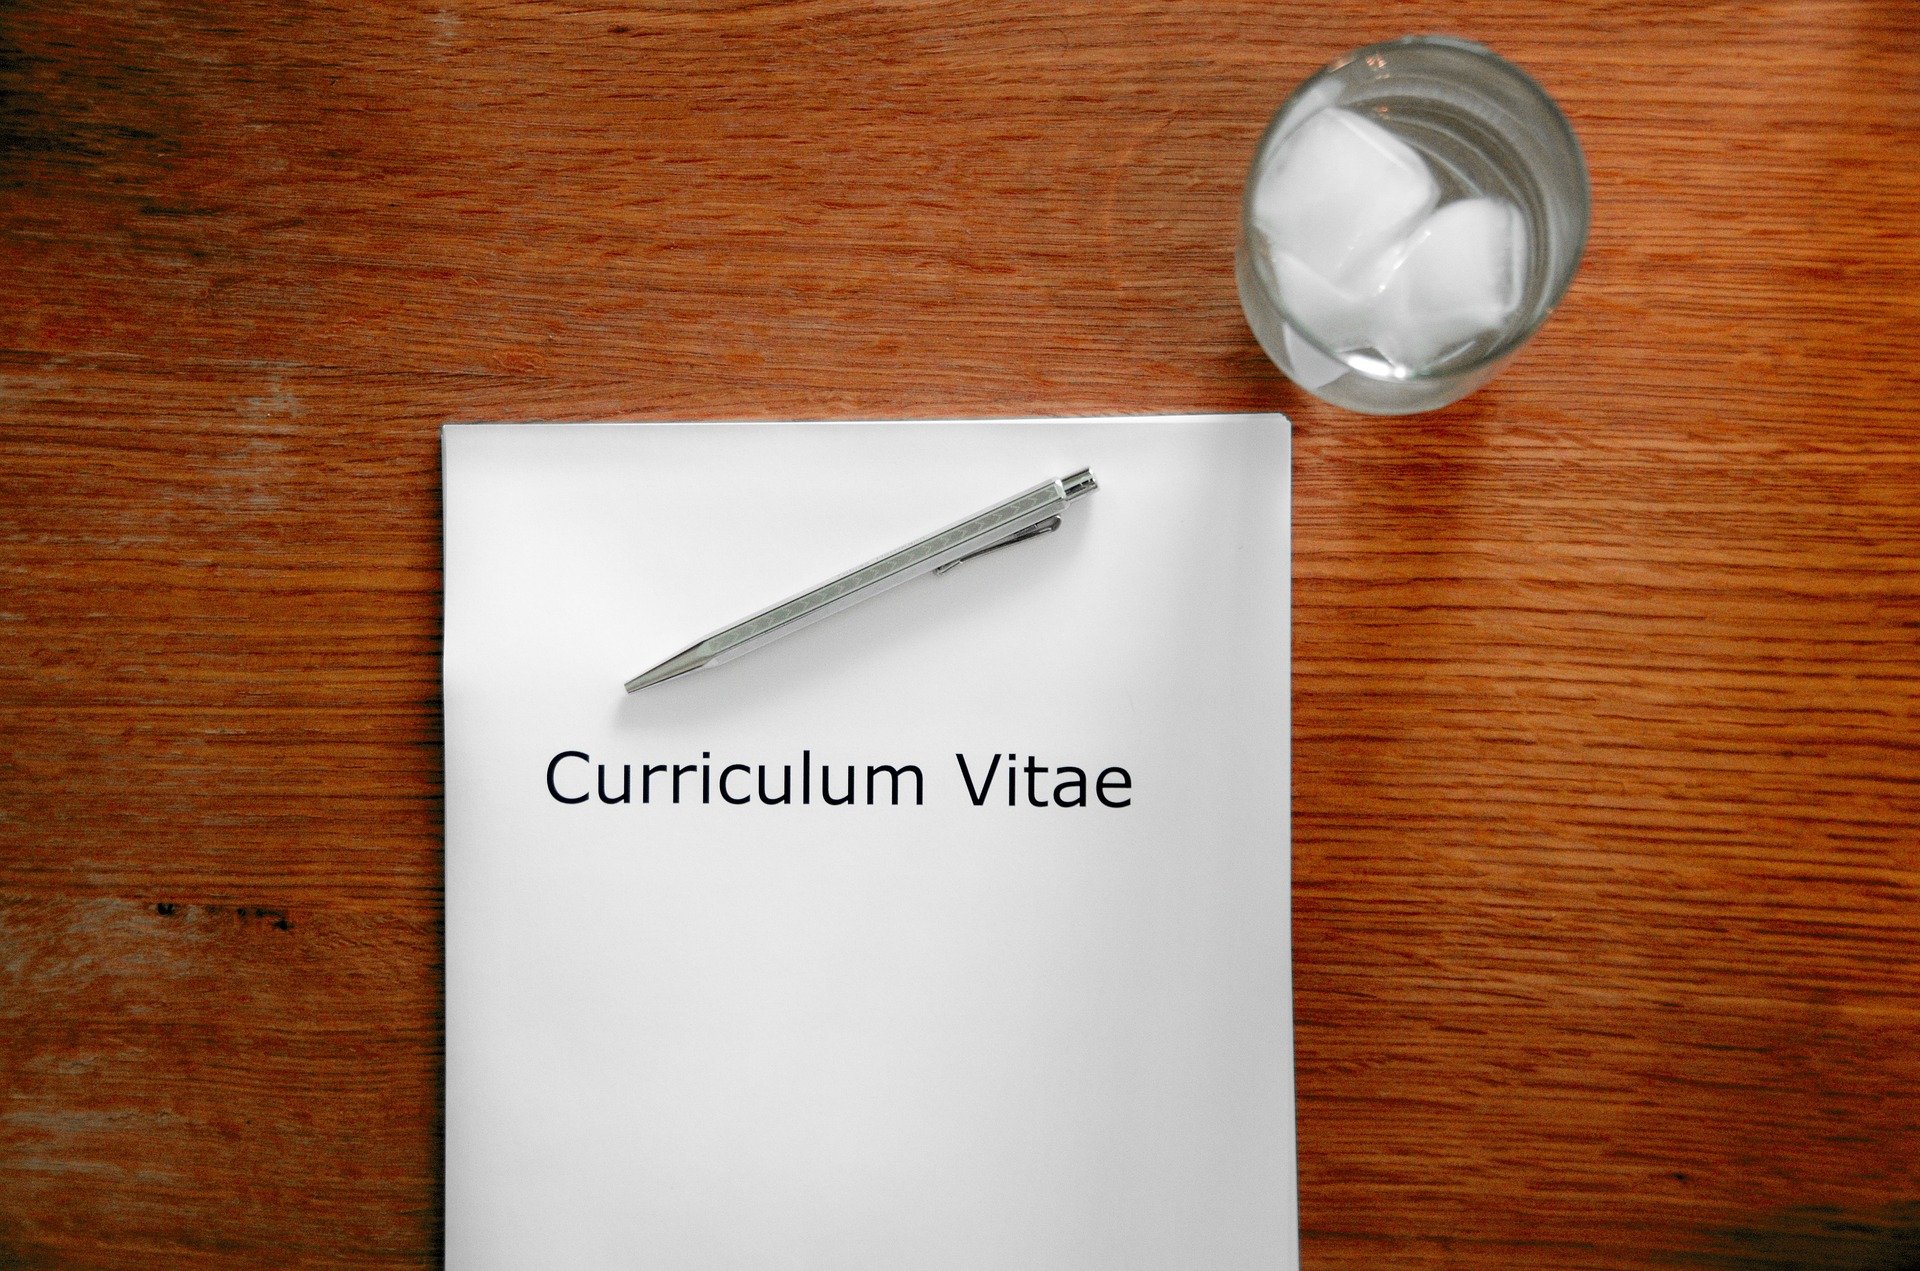 Pictured - A Curriculum Vitae on top a desk during a interview | Source: Pixabay